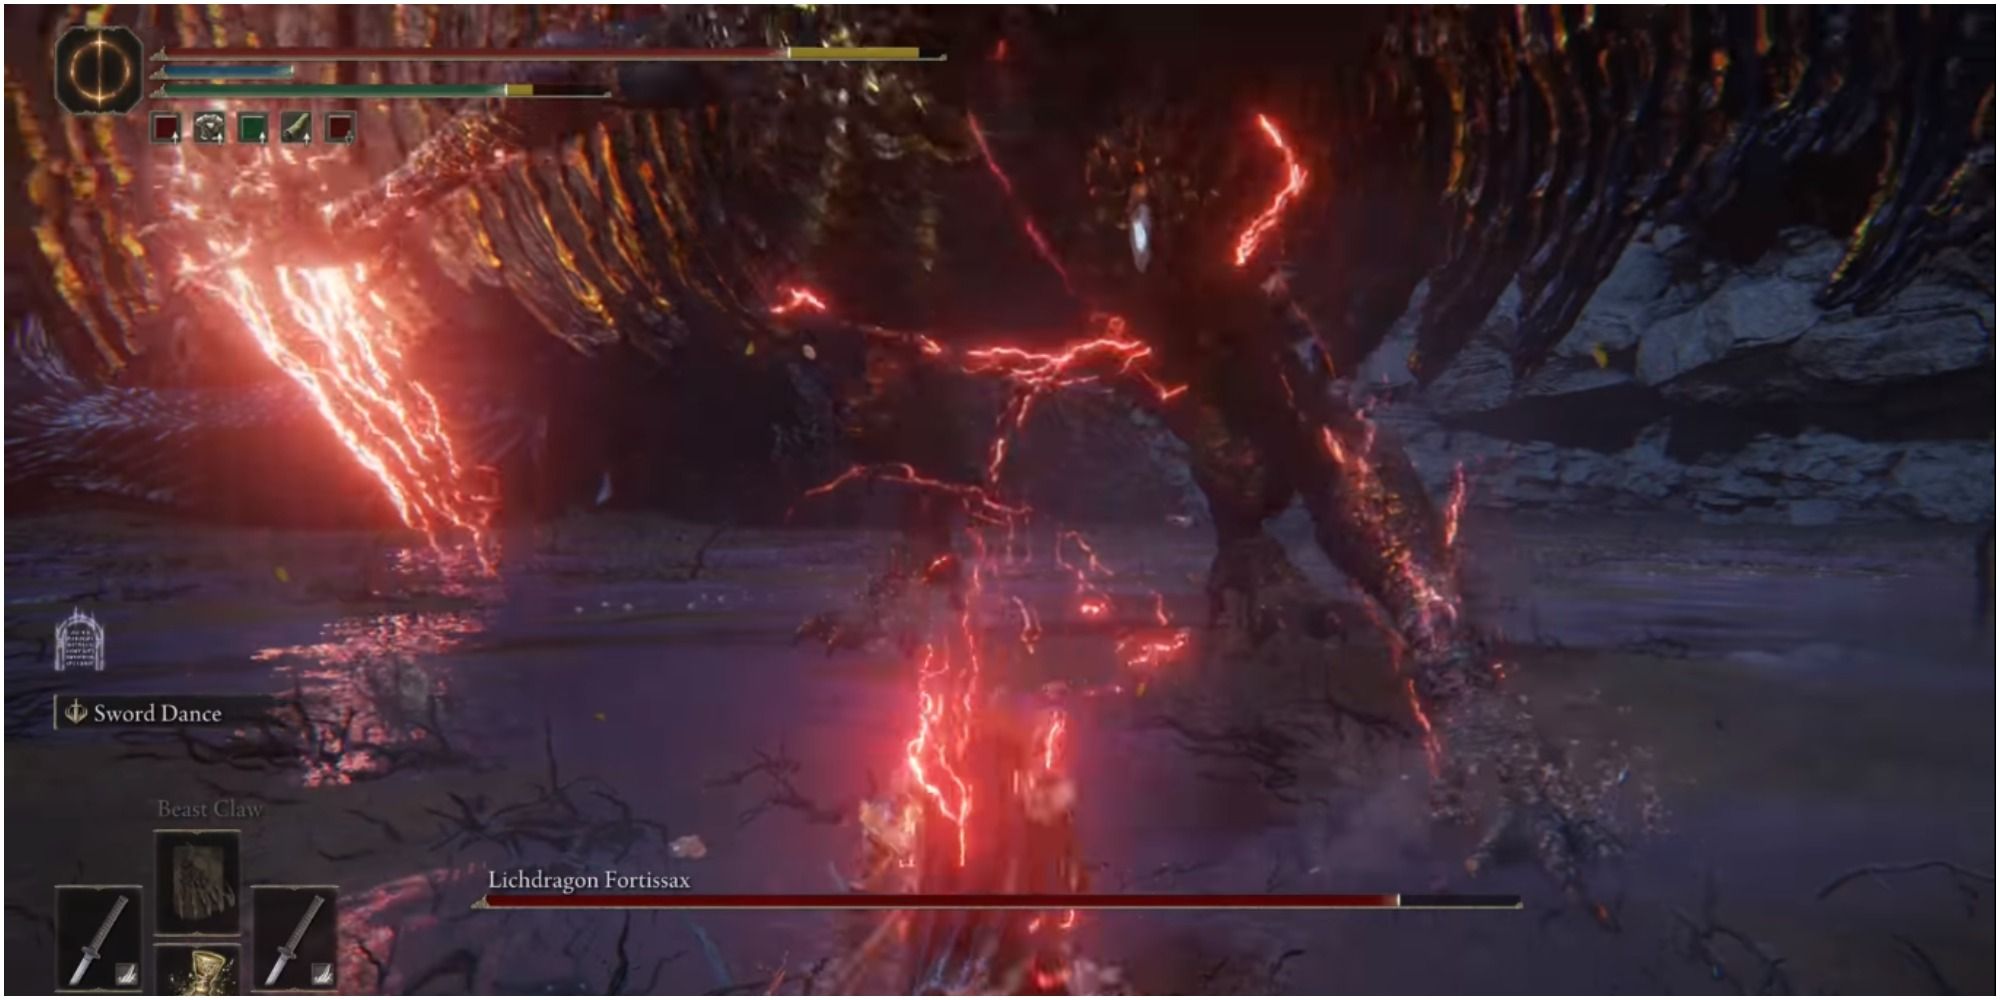 The boss attacking the player with a lightning hand strike.